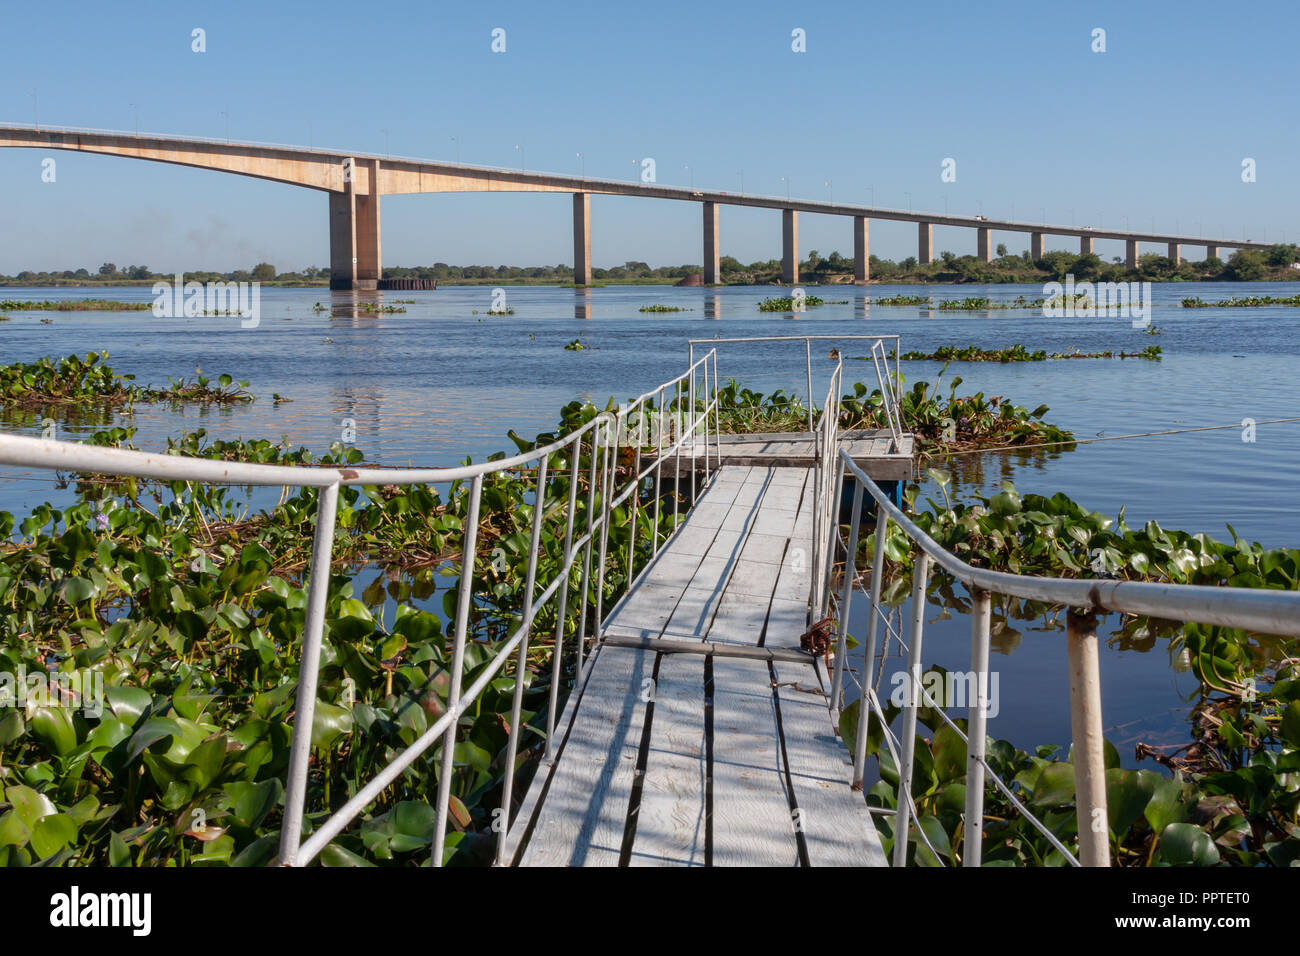 Rustic wooden footpath bridge over water, small dock pier, Rio (River) Paraguay, Puente (Bridge) Remanso Castillo on the background, M.R.A., Paraguay Stock Photo